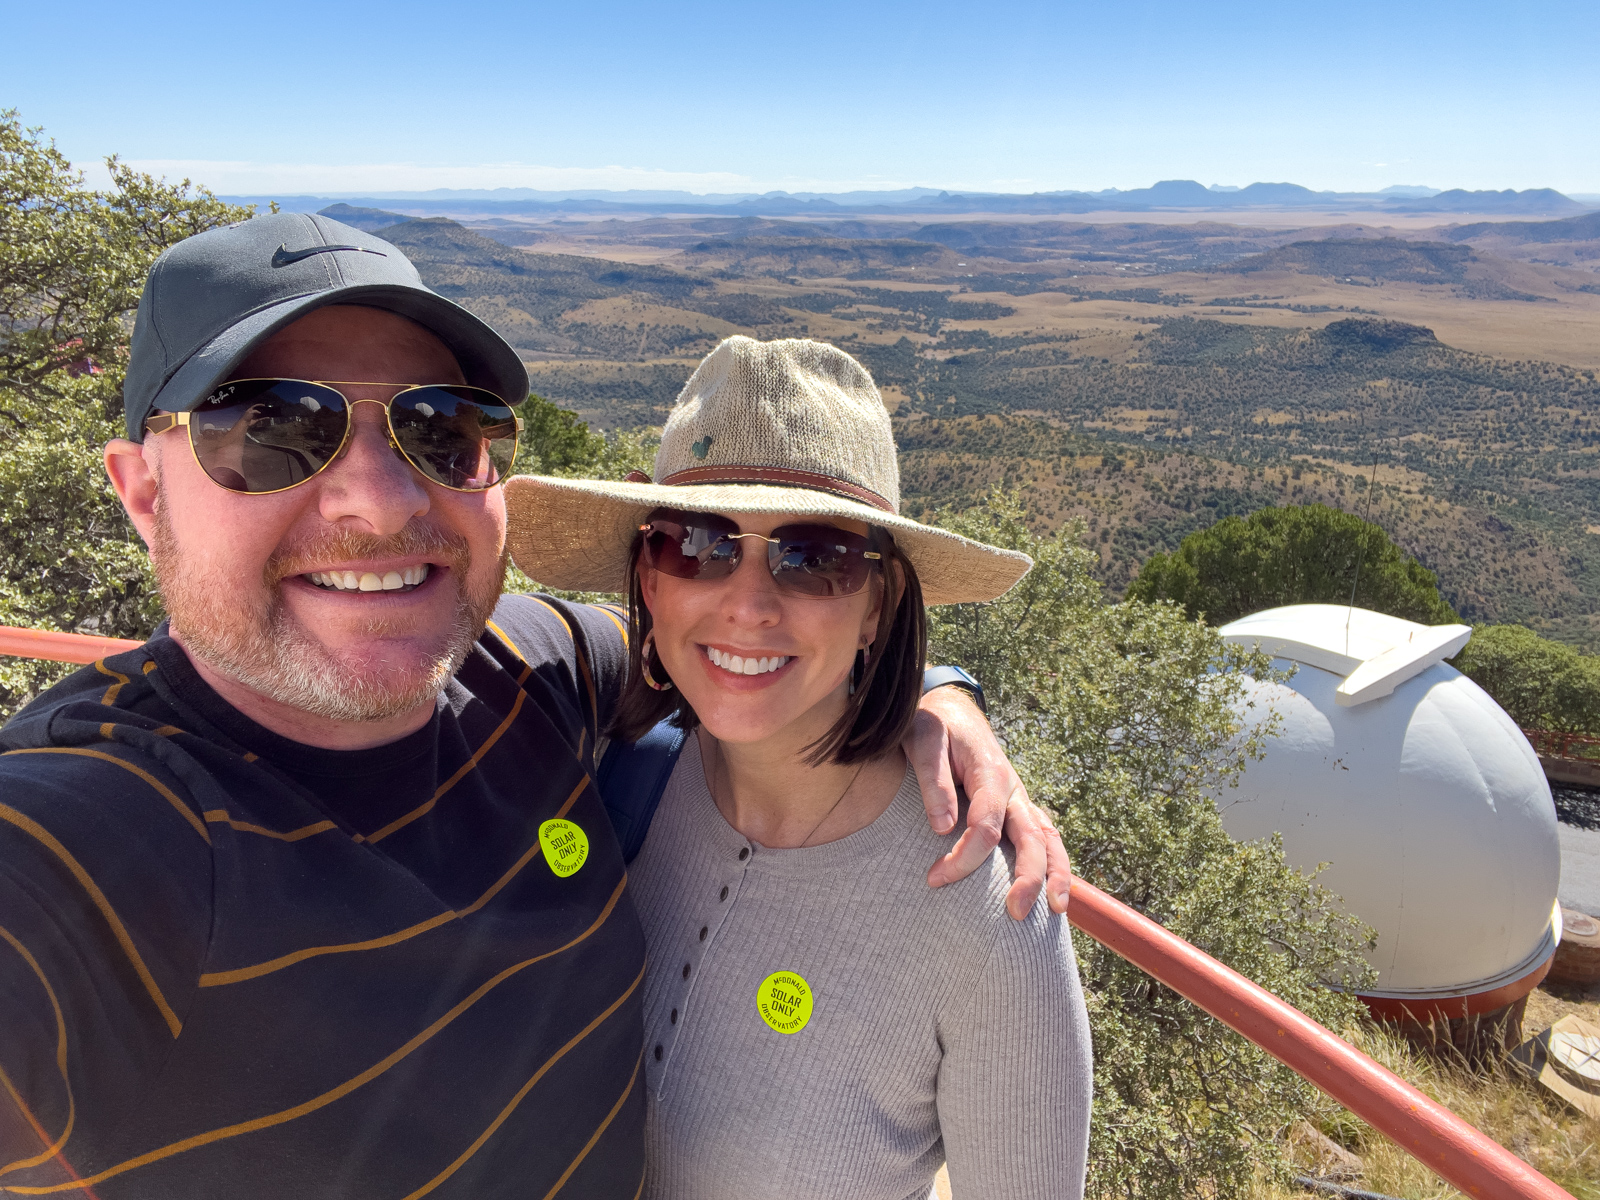 Dave and Kel at the McDonald Observatory atop Mt. Locke 